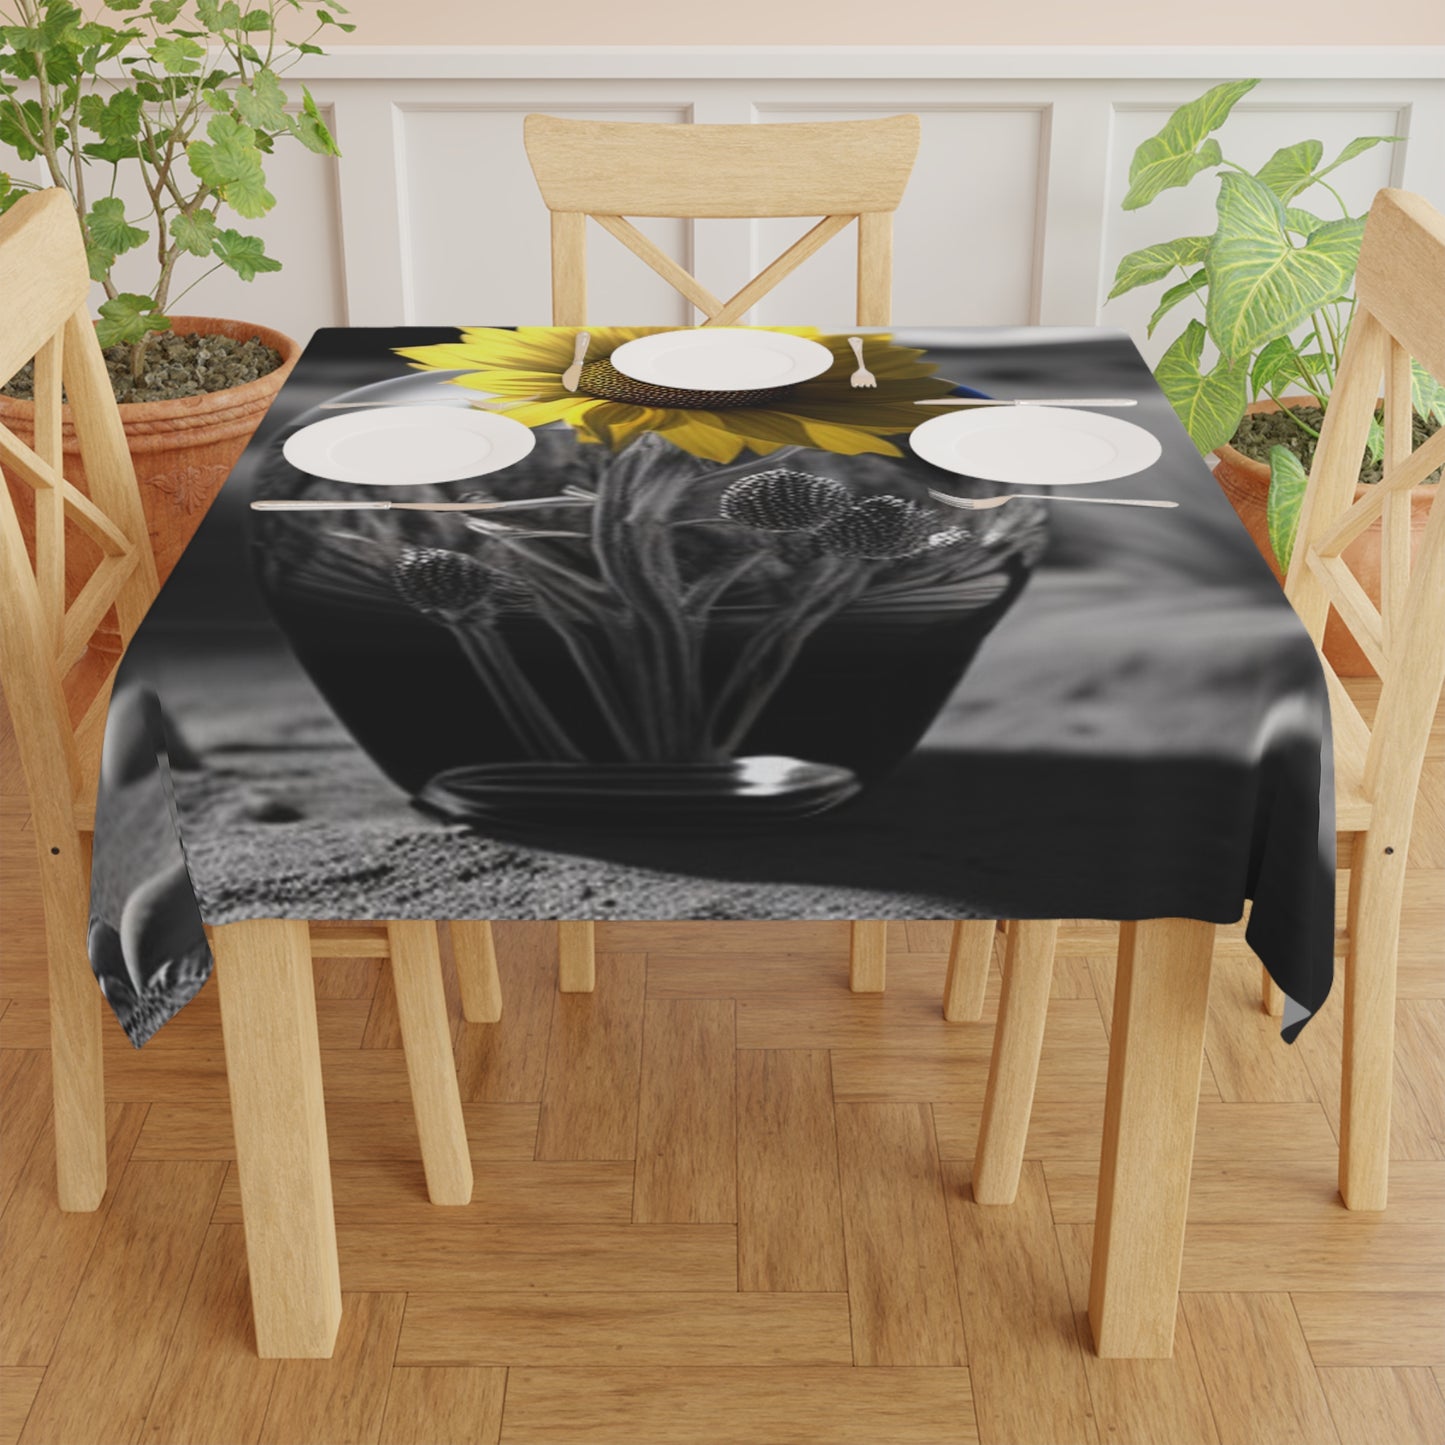 Tablecloth Yellw Sunflower in a vase 3